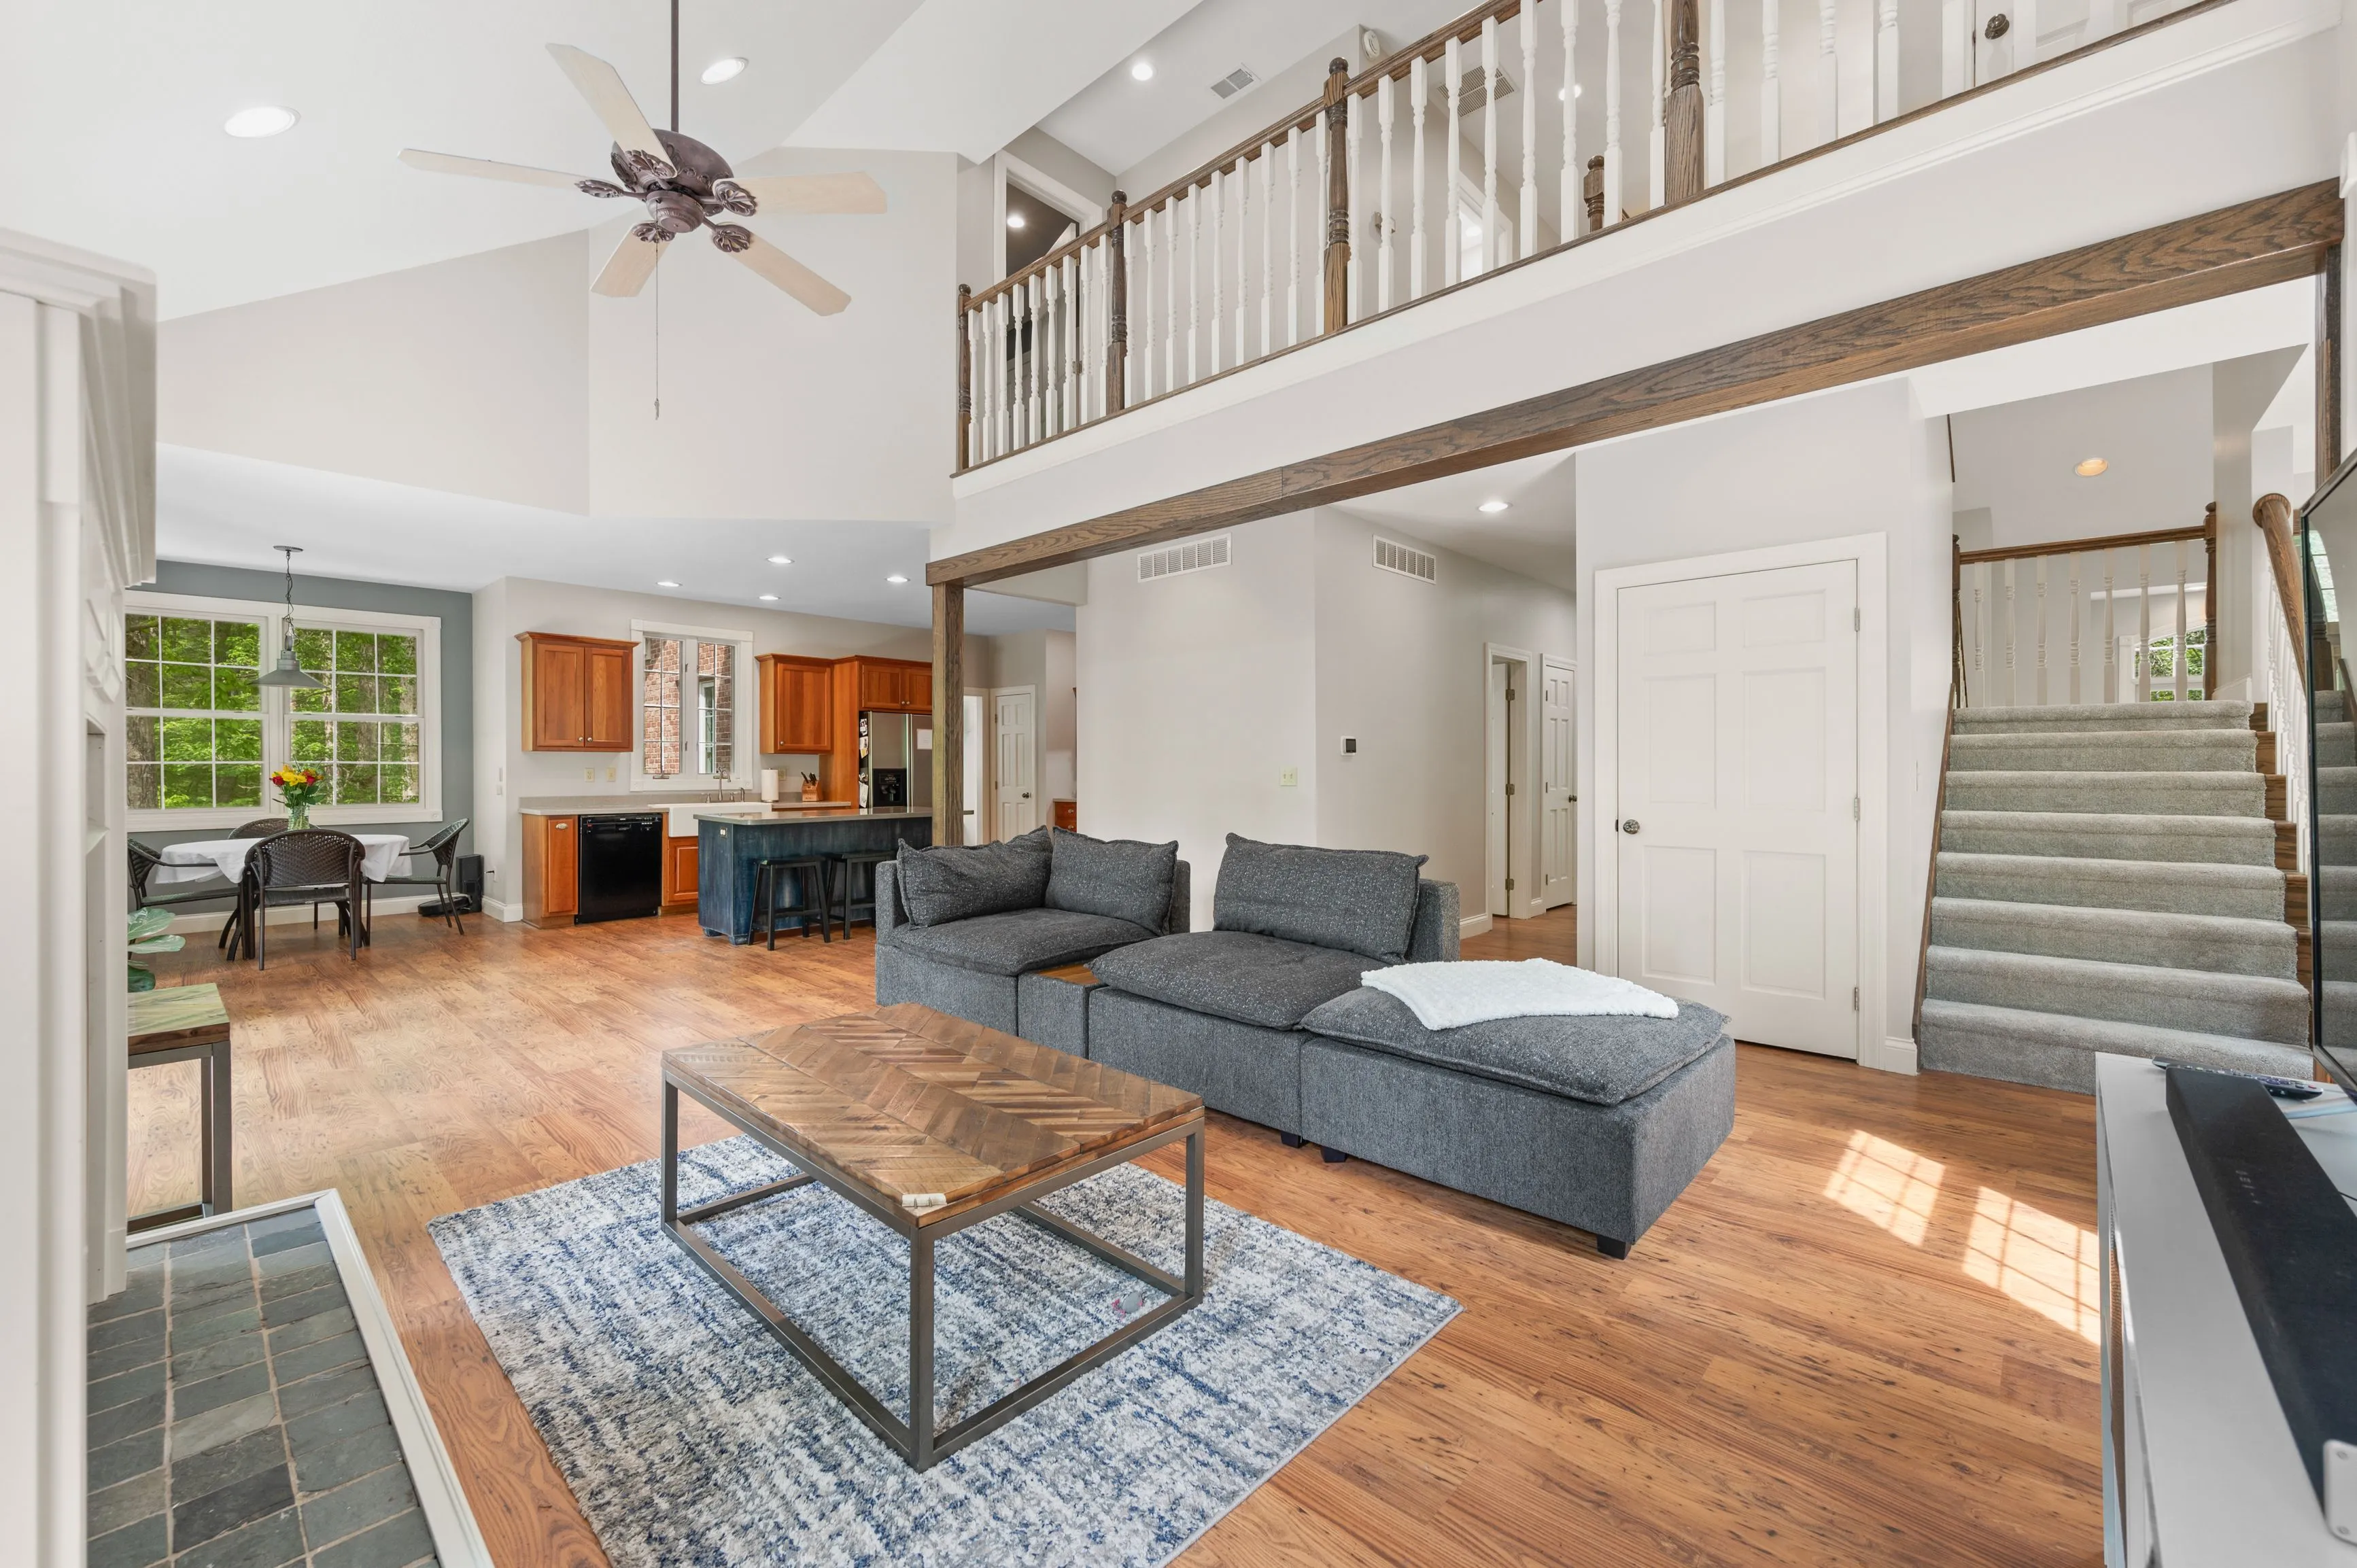 Bright and airy open-concept living space with a sectional sofa, hardwood floors, high ceiling with a fan, and an adjoining kitchen with wooden cabinets.